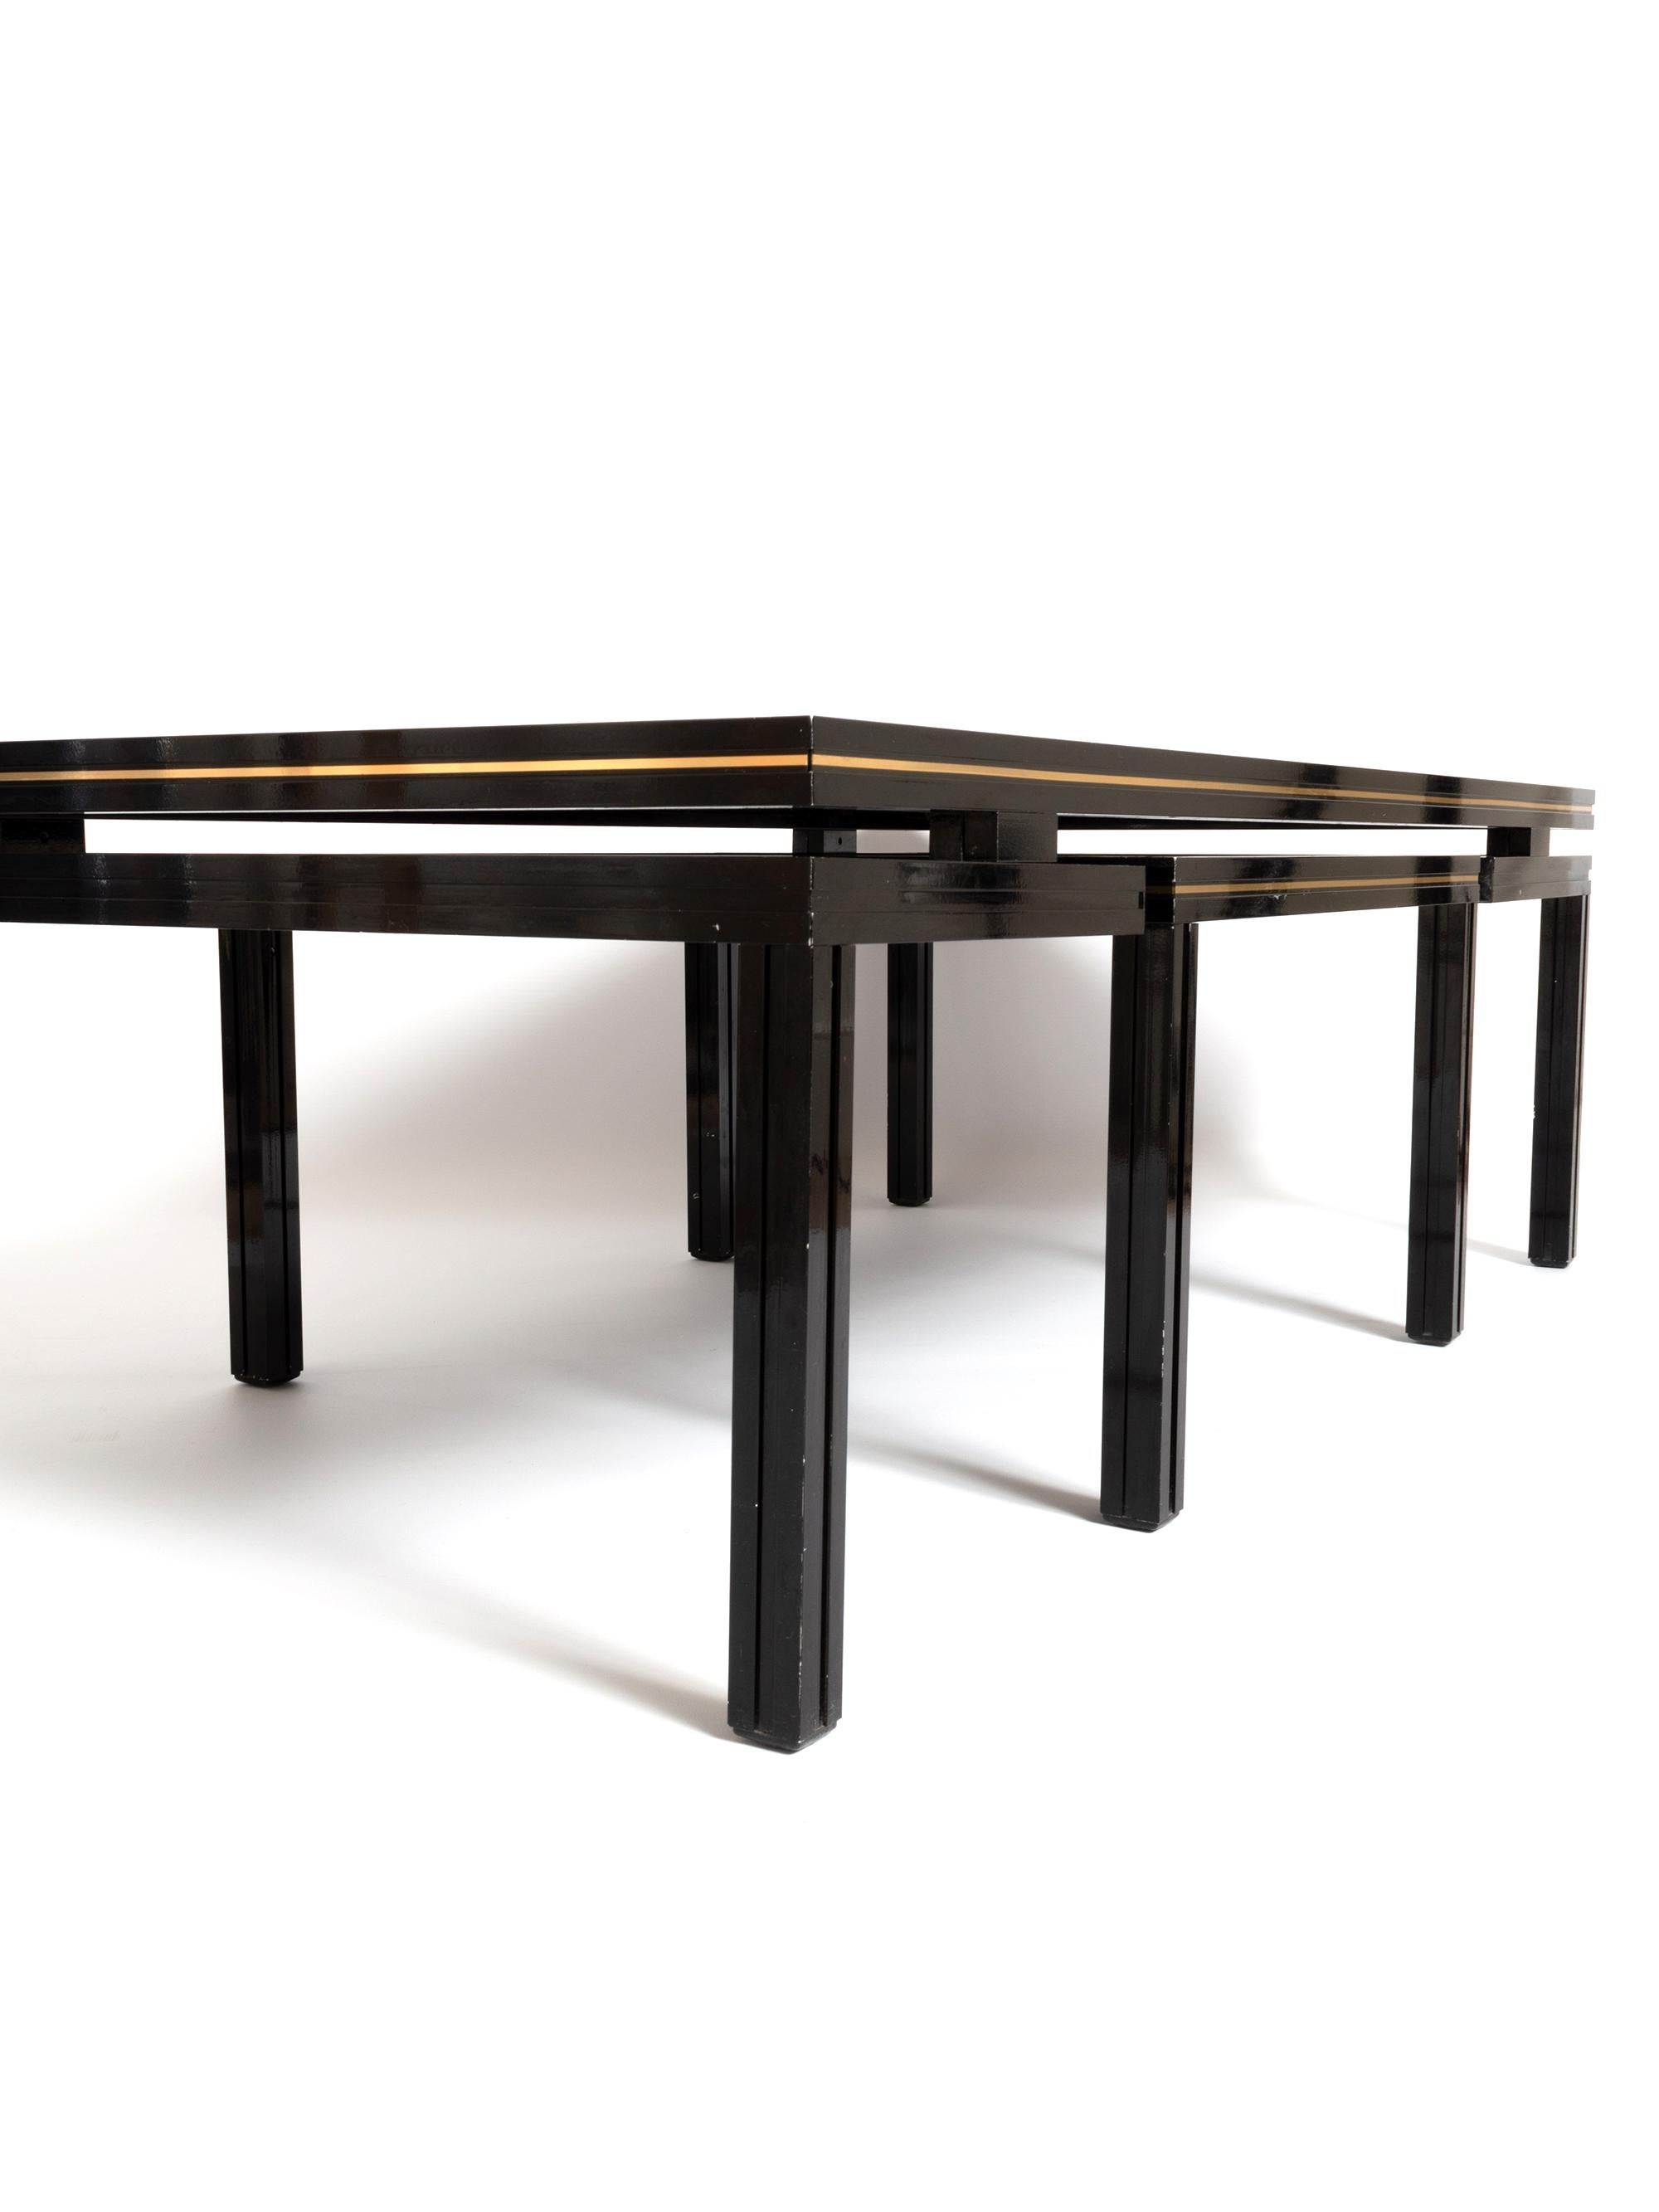 Late 20th Century Pierre Vandel Paris Black Lacquer Coffee Table with Nesting Table, France